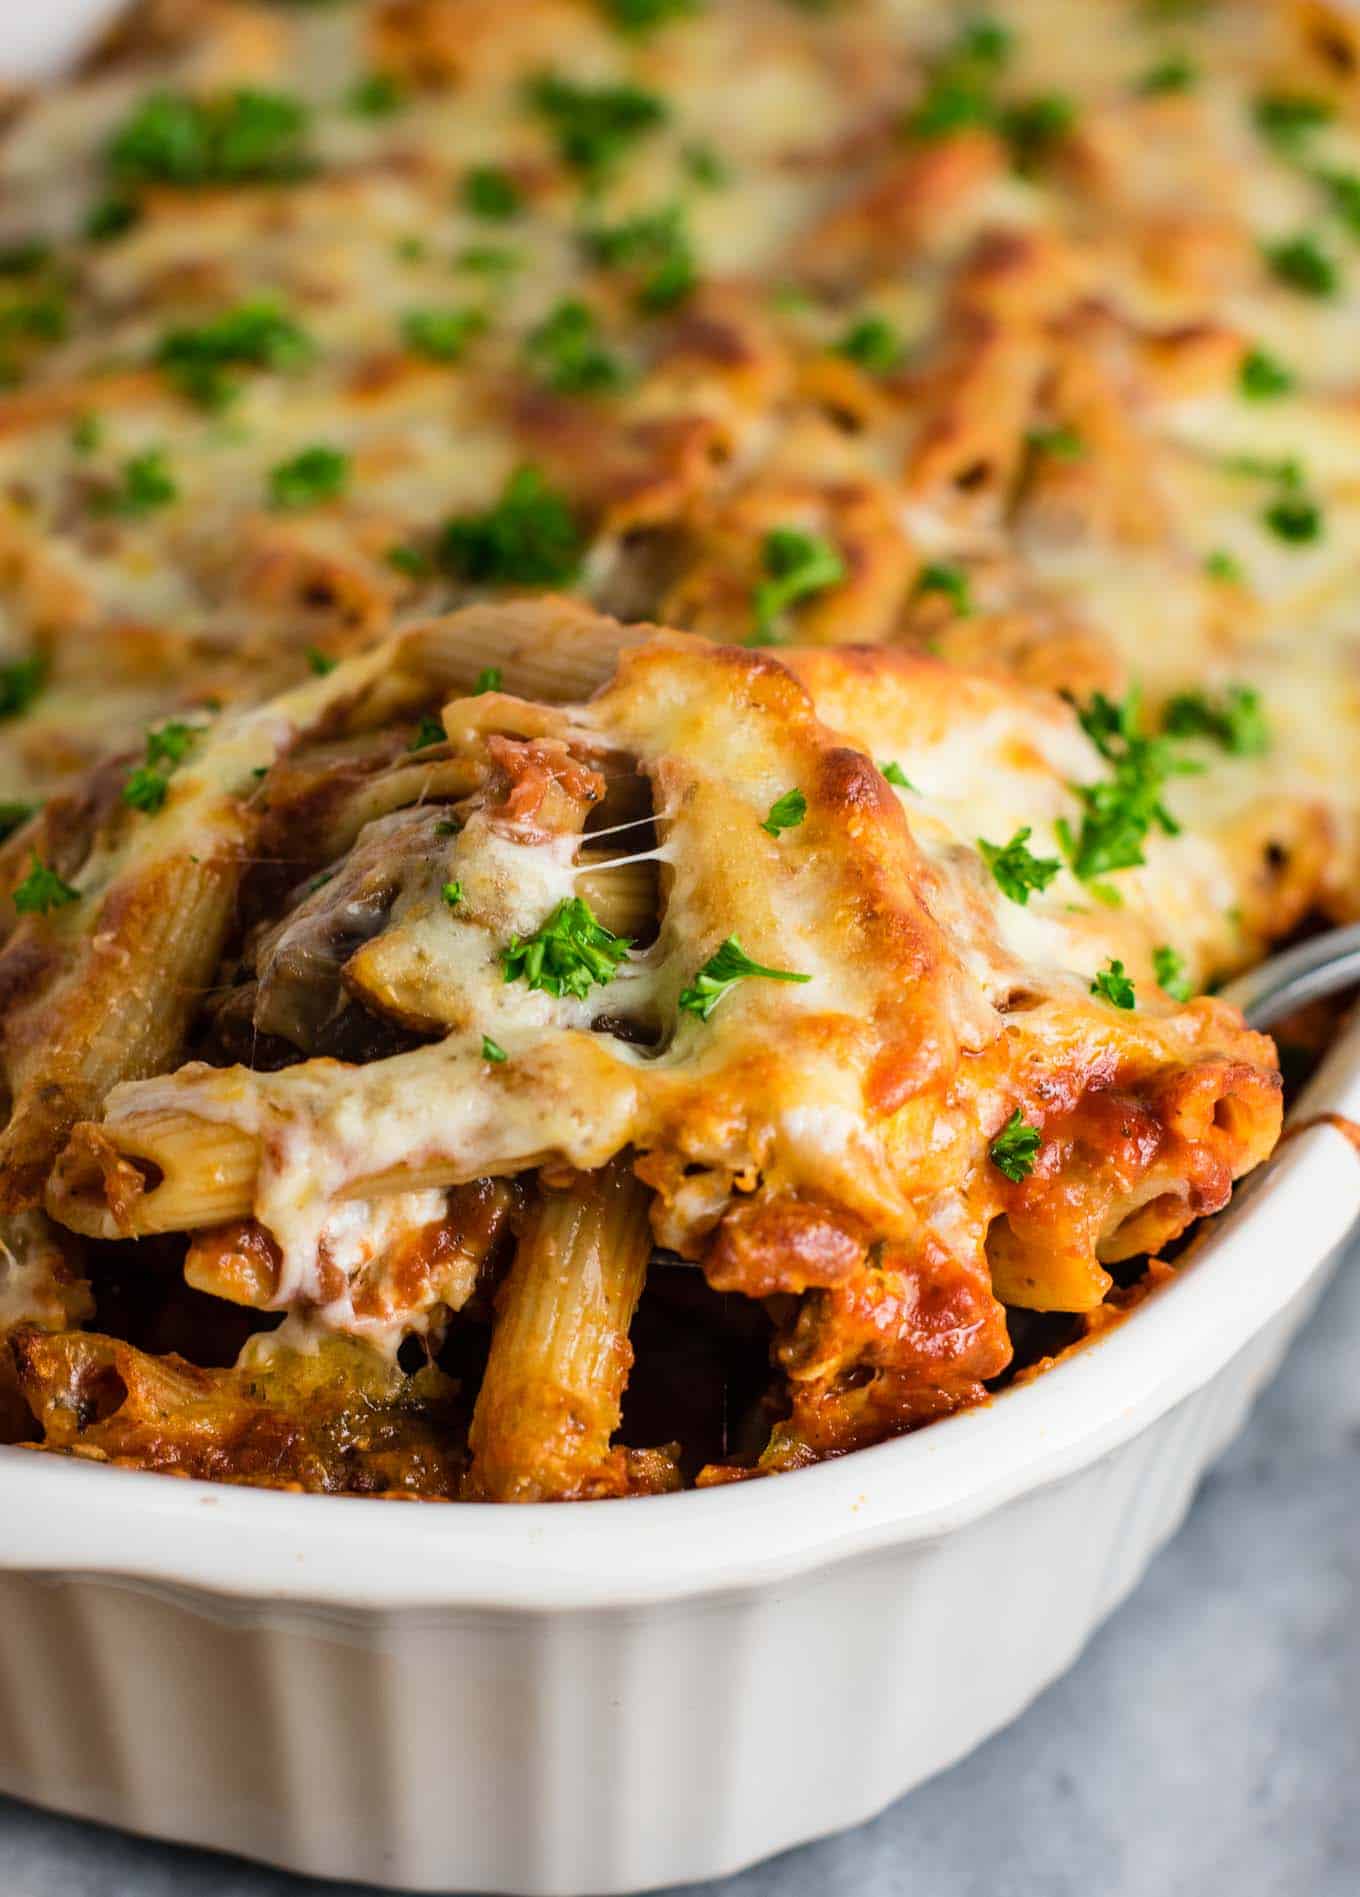 This Meatless Million Dollar Baked Ziti Recipe is an easy and impressive vegetarian dinner